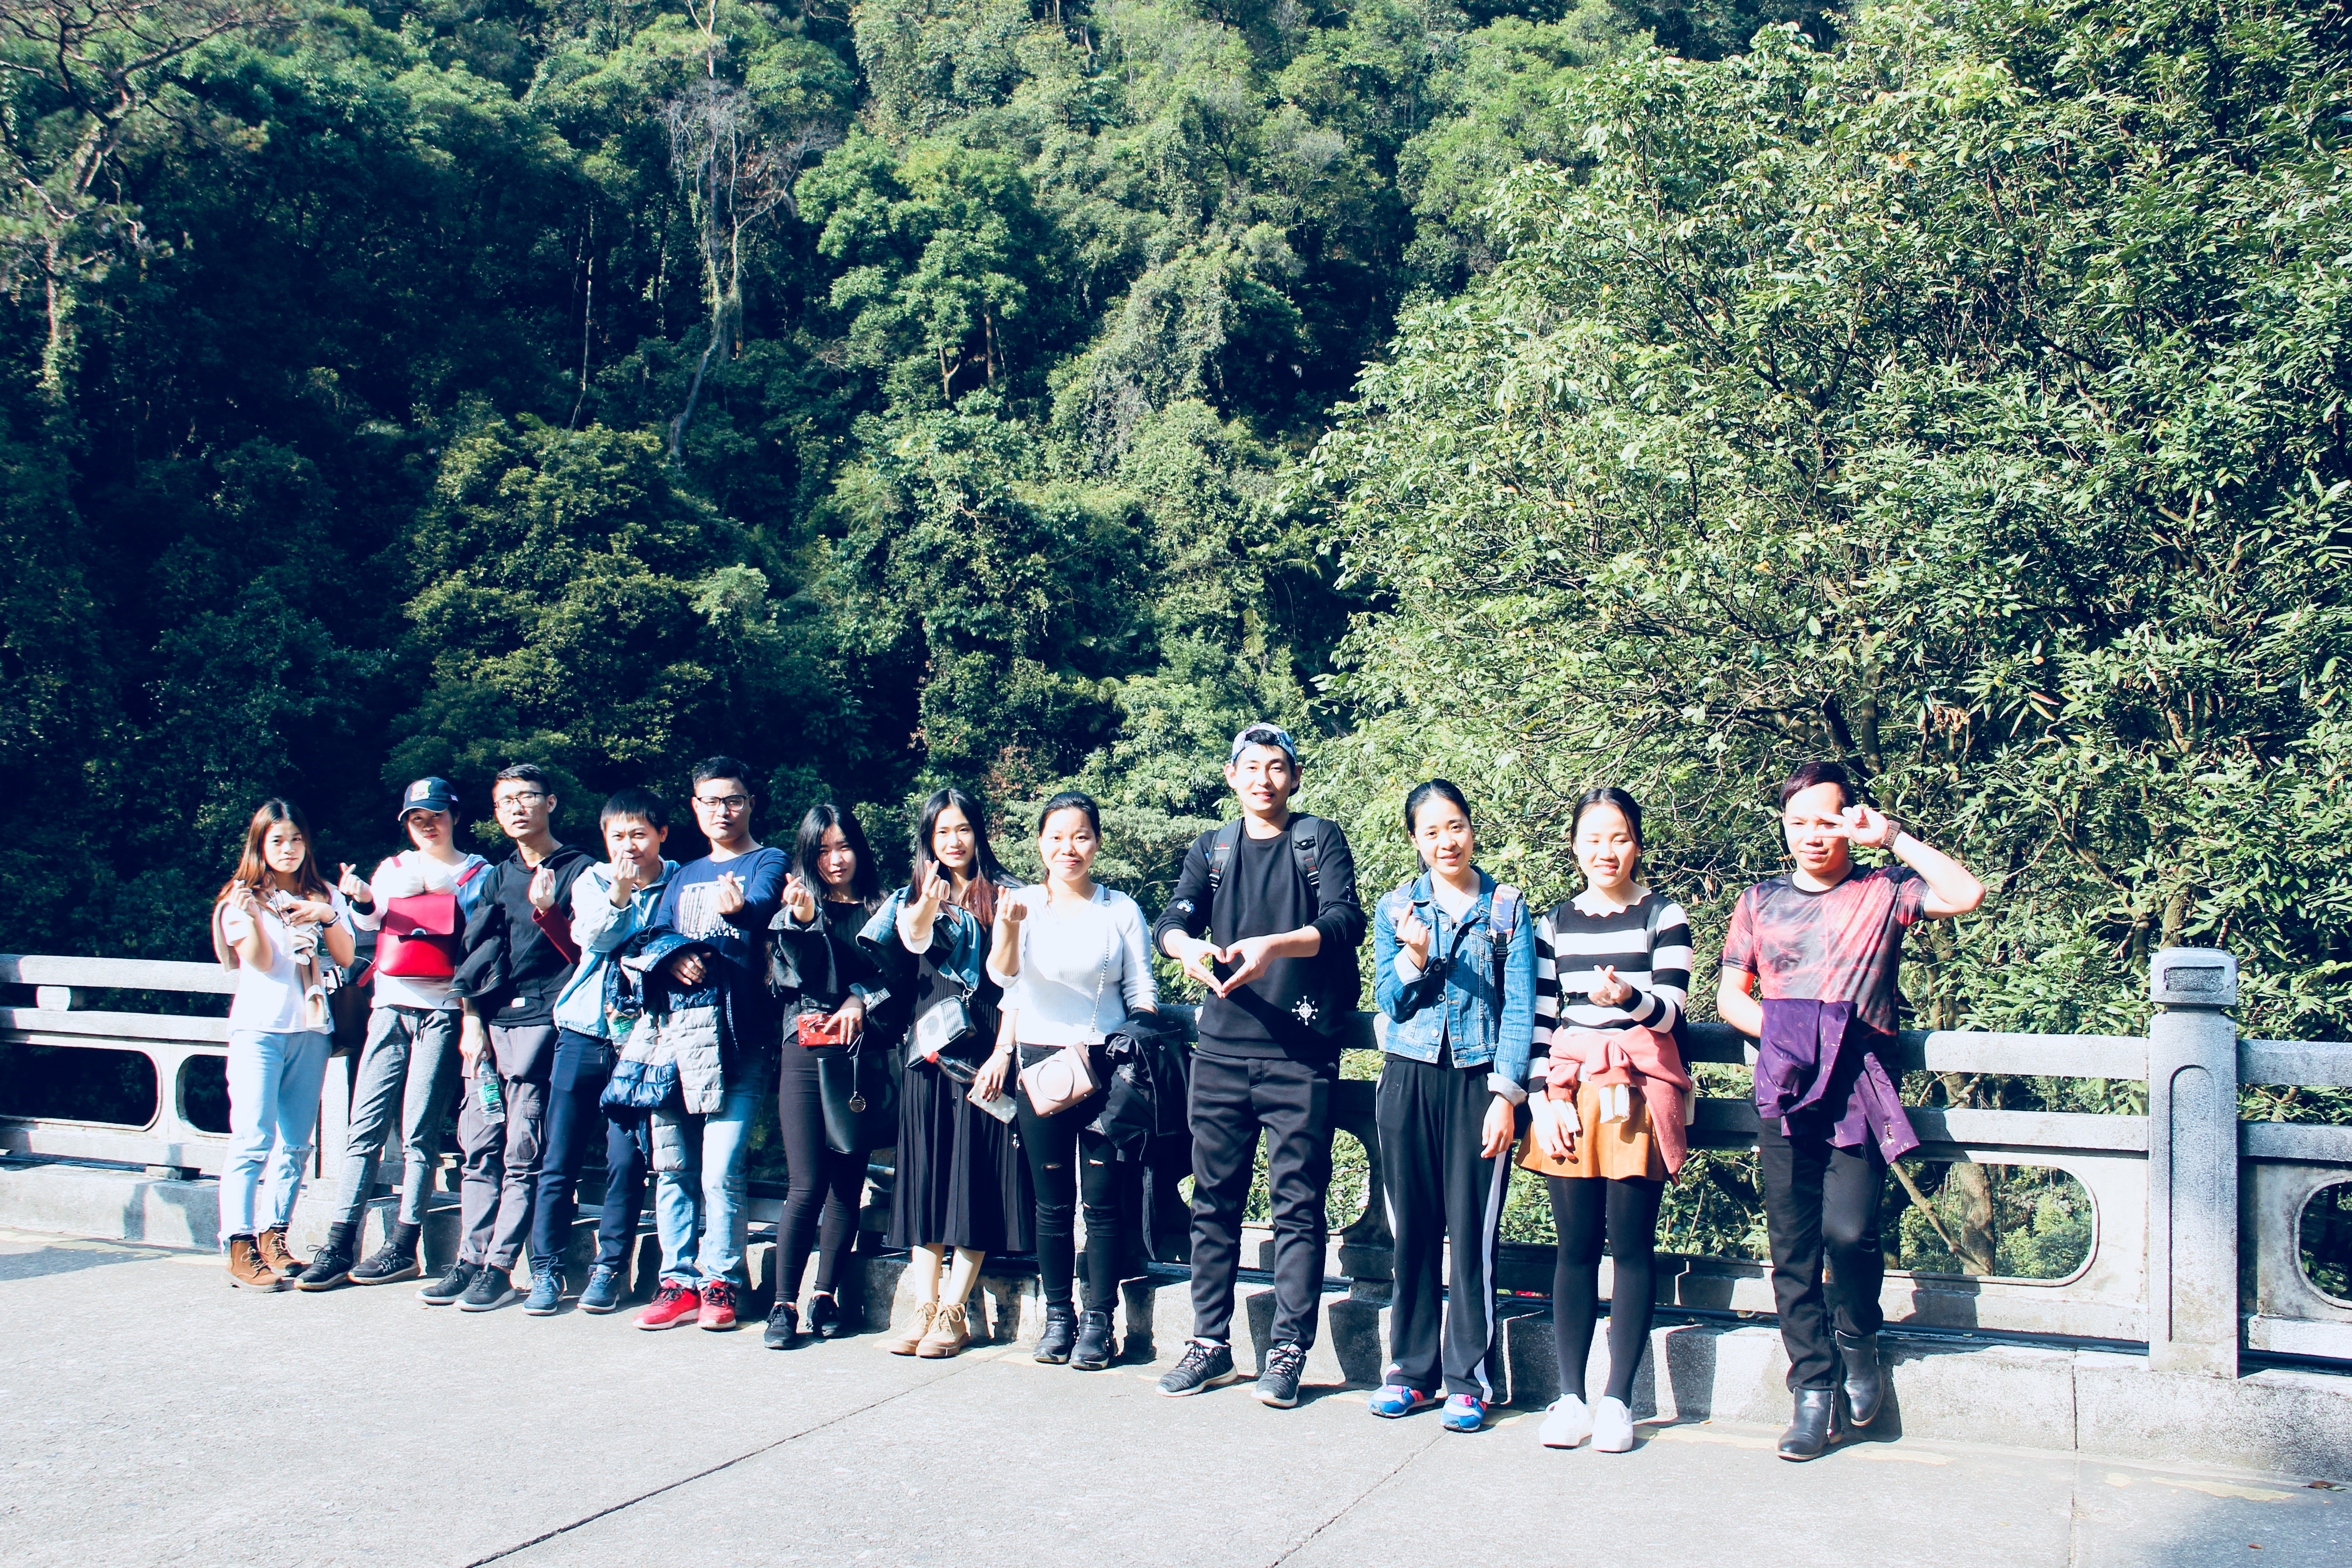 The company organizes the collective zhaoqing two day night tour.